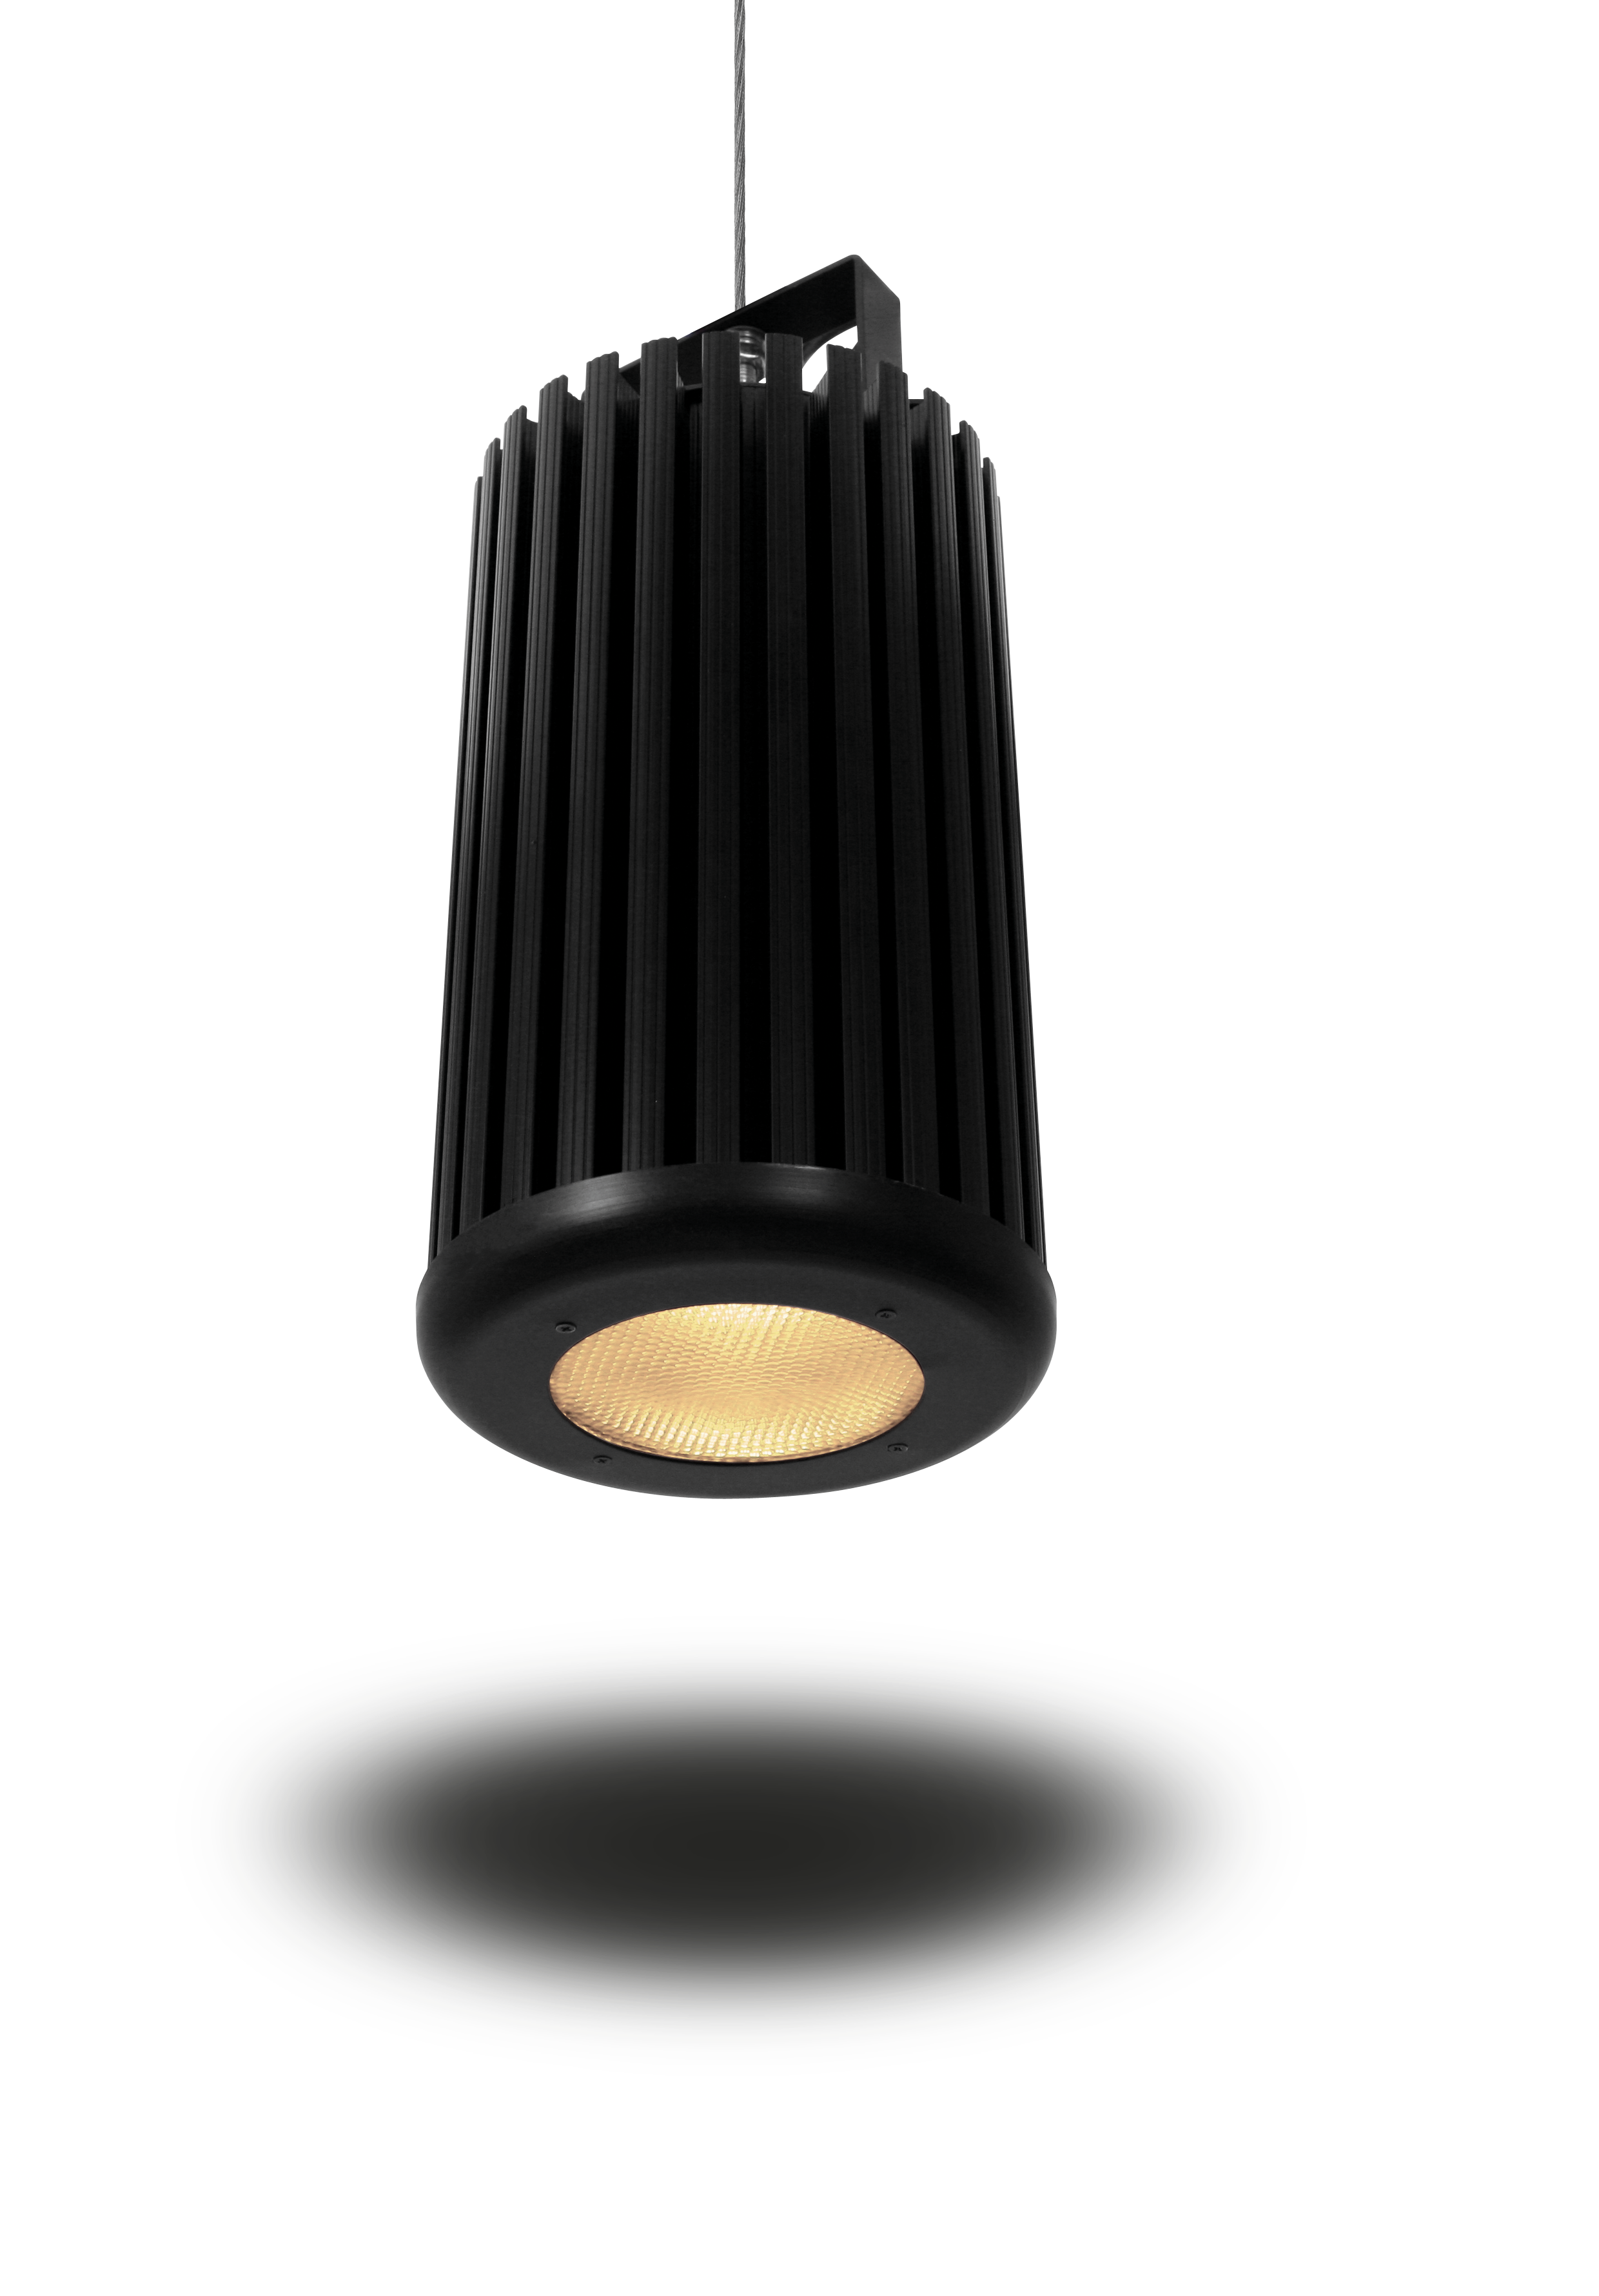 Chroma-Q® Introduces Dimmable Inspire MD™